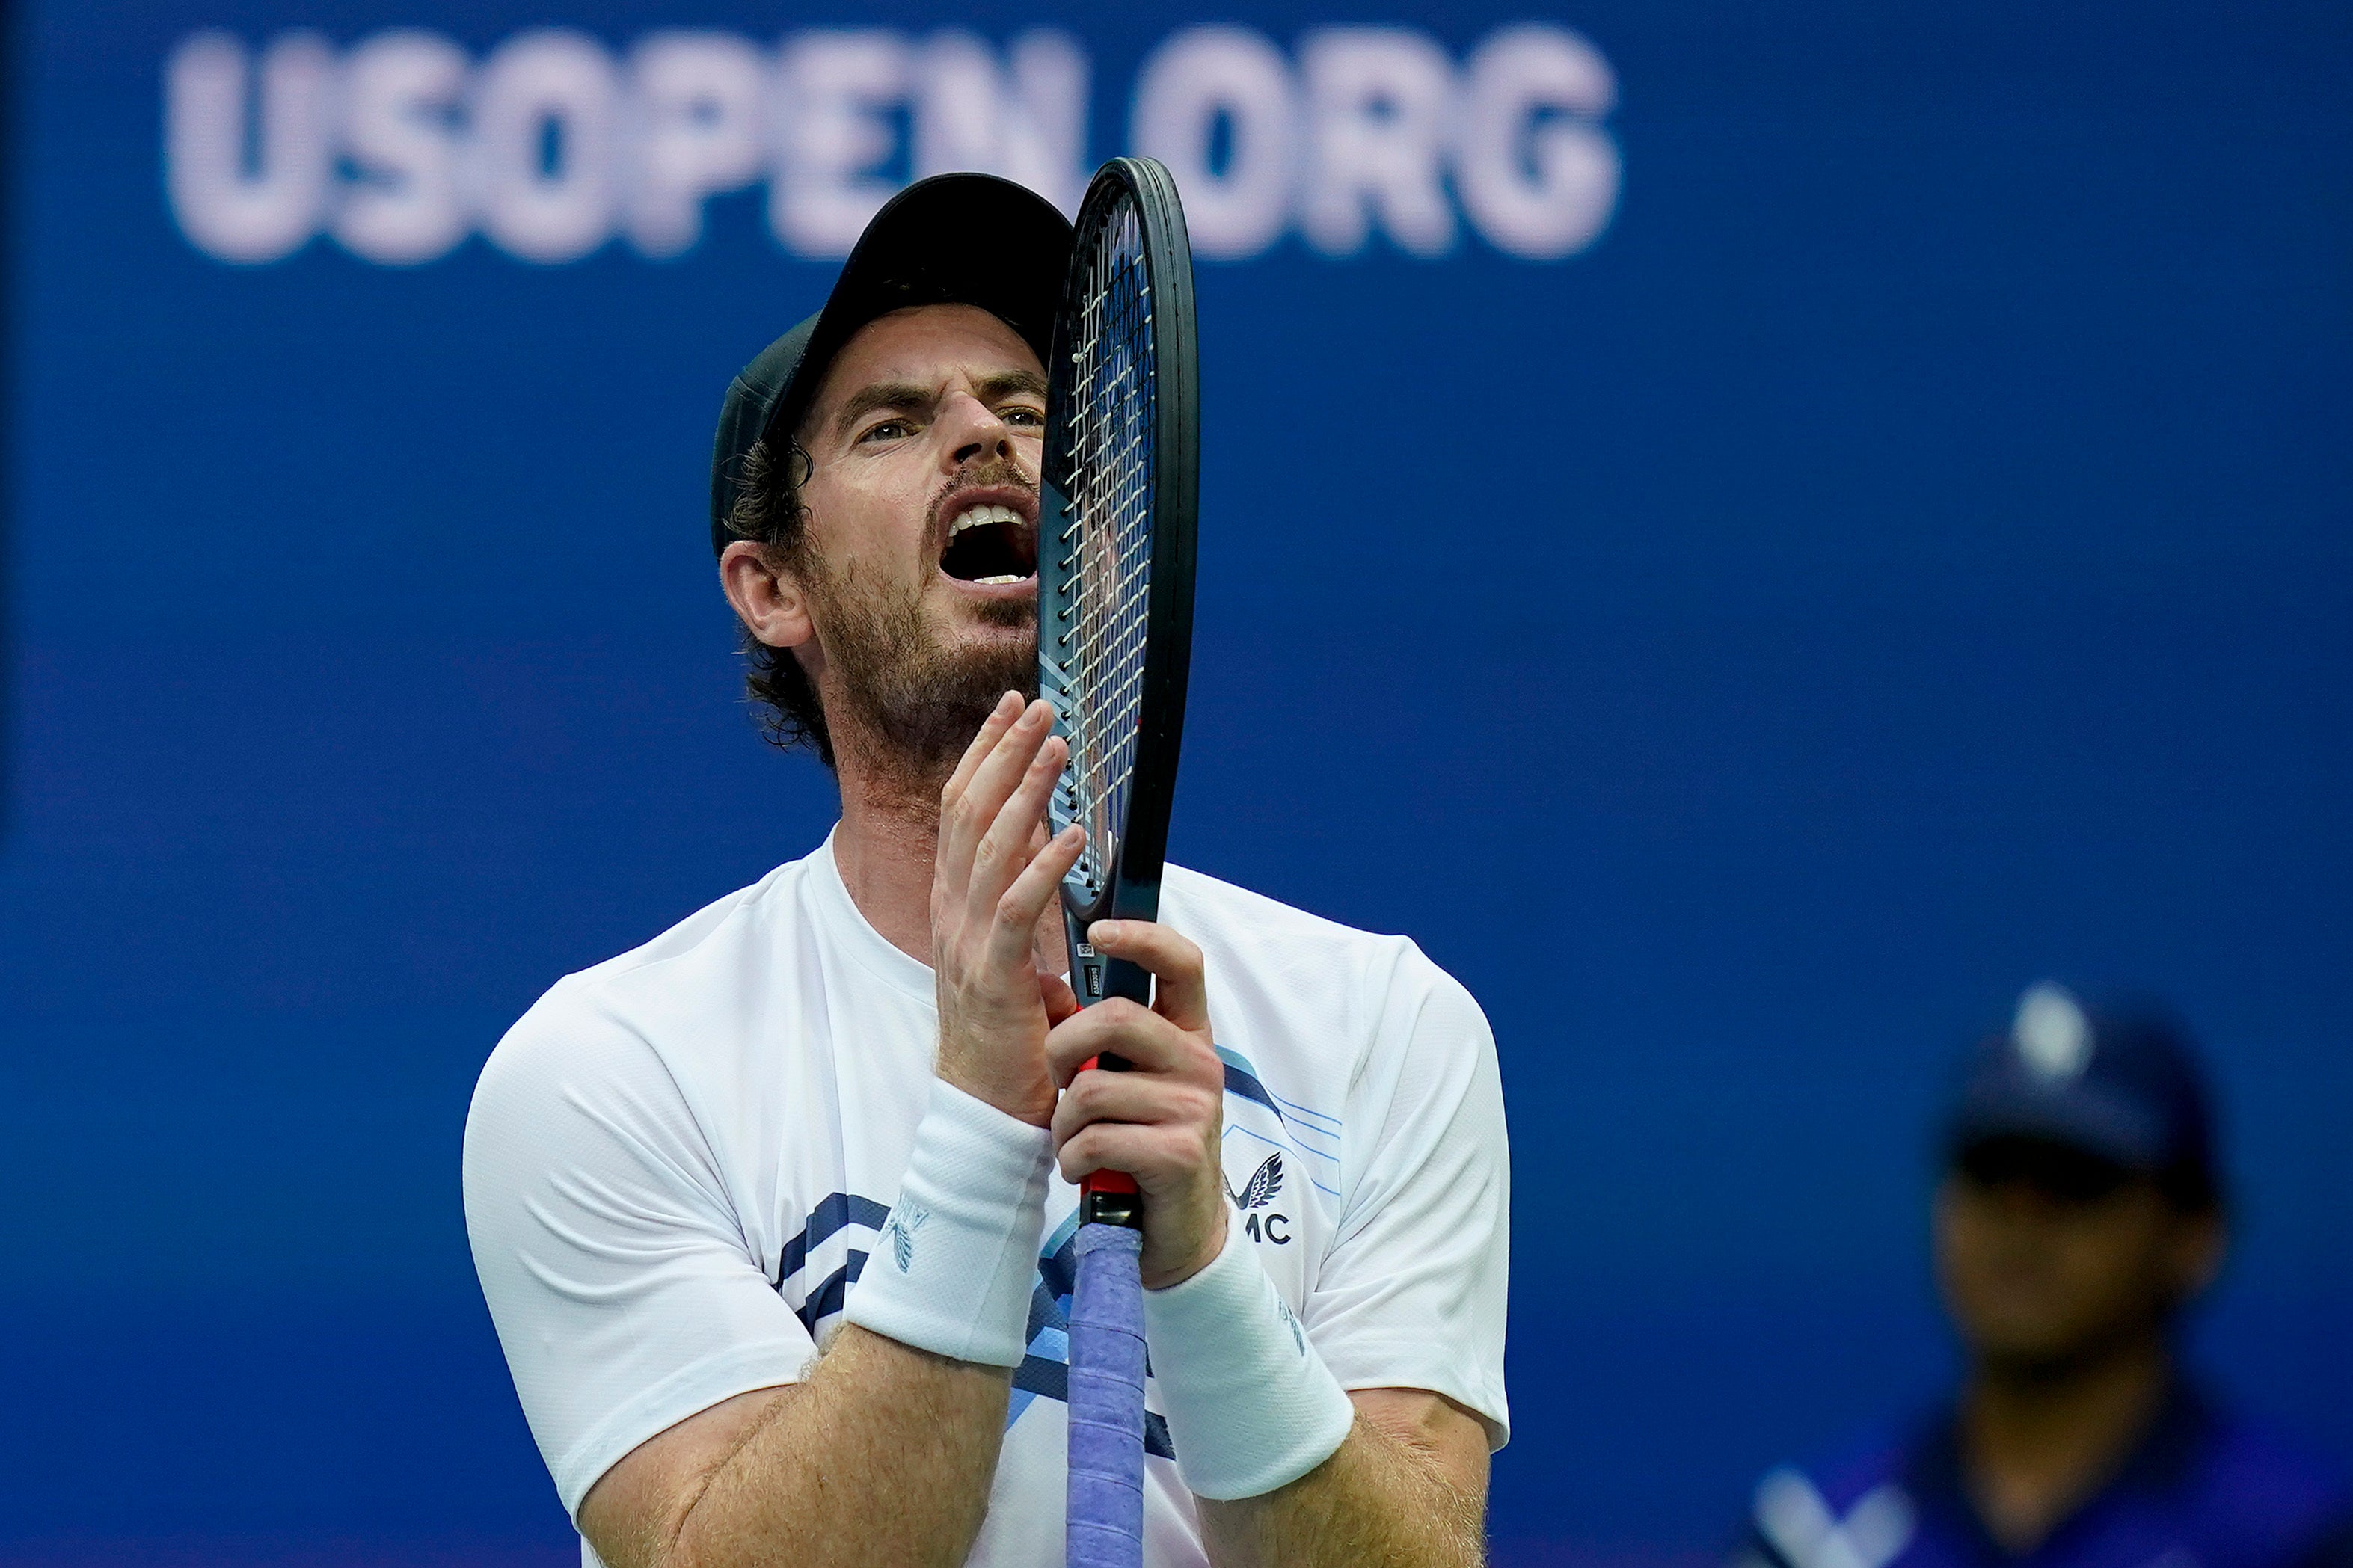 Andy Murray went down in five sets (Seth Wenig/AP)